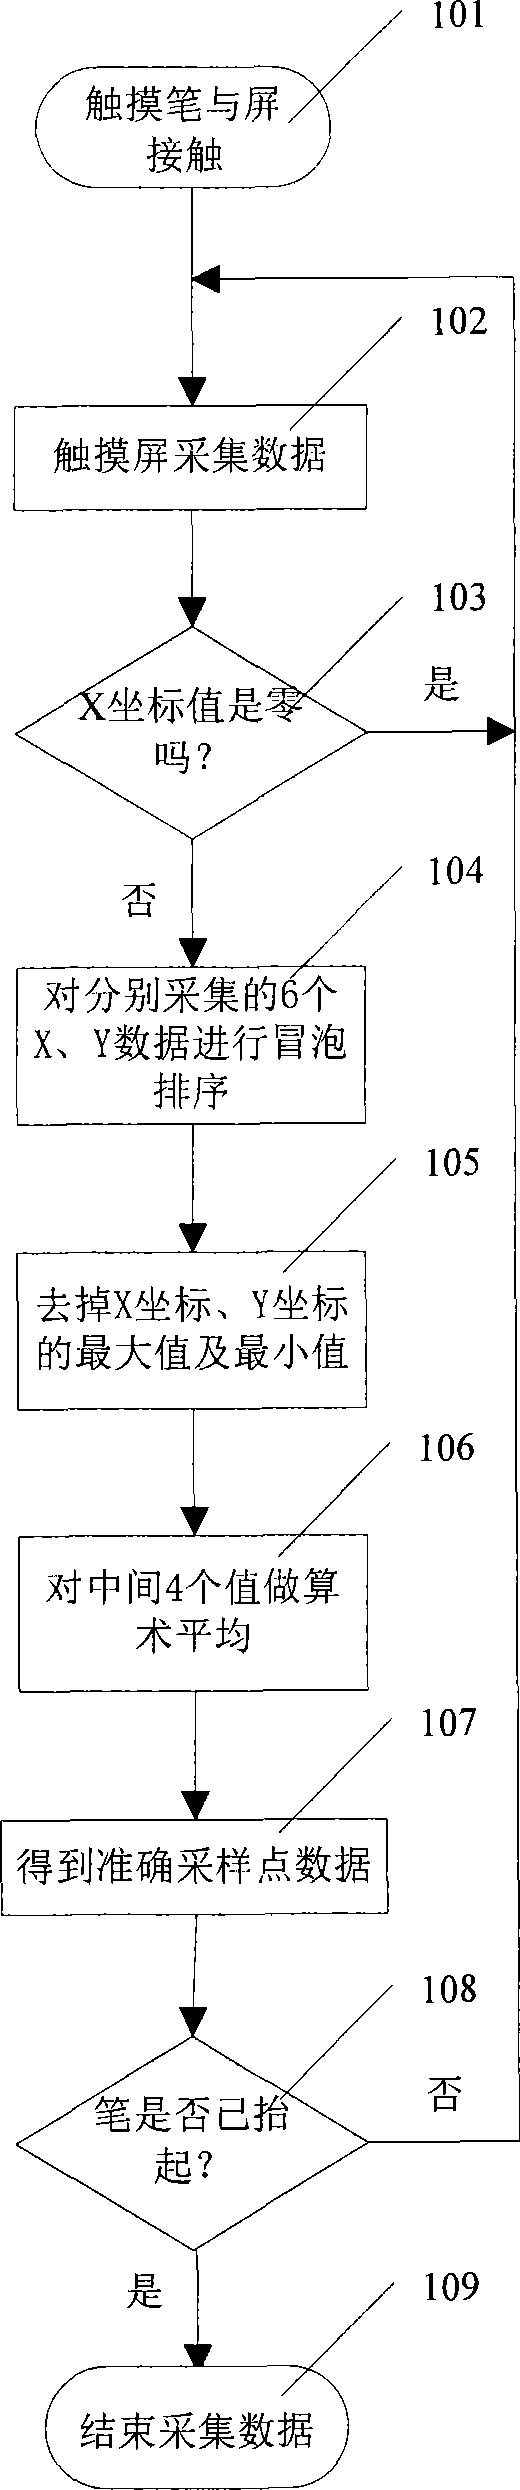 Digital filtering method for processing flying spot on touch screen